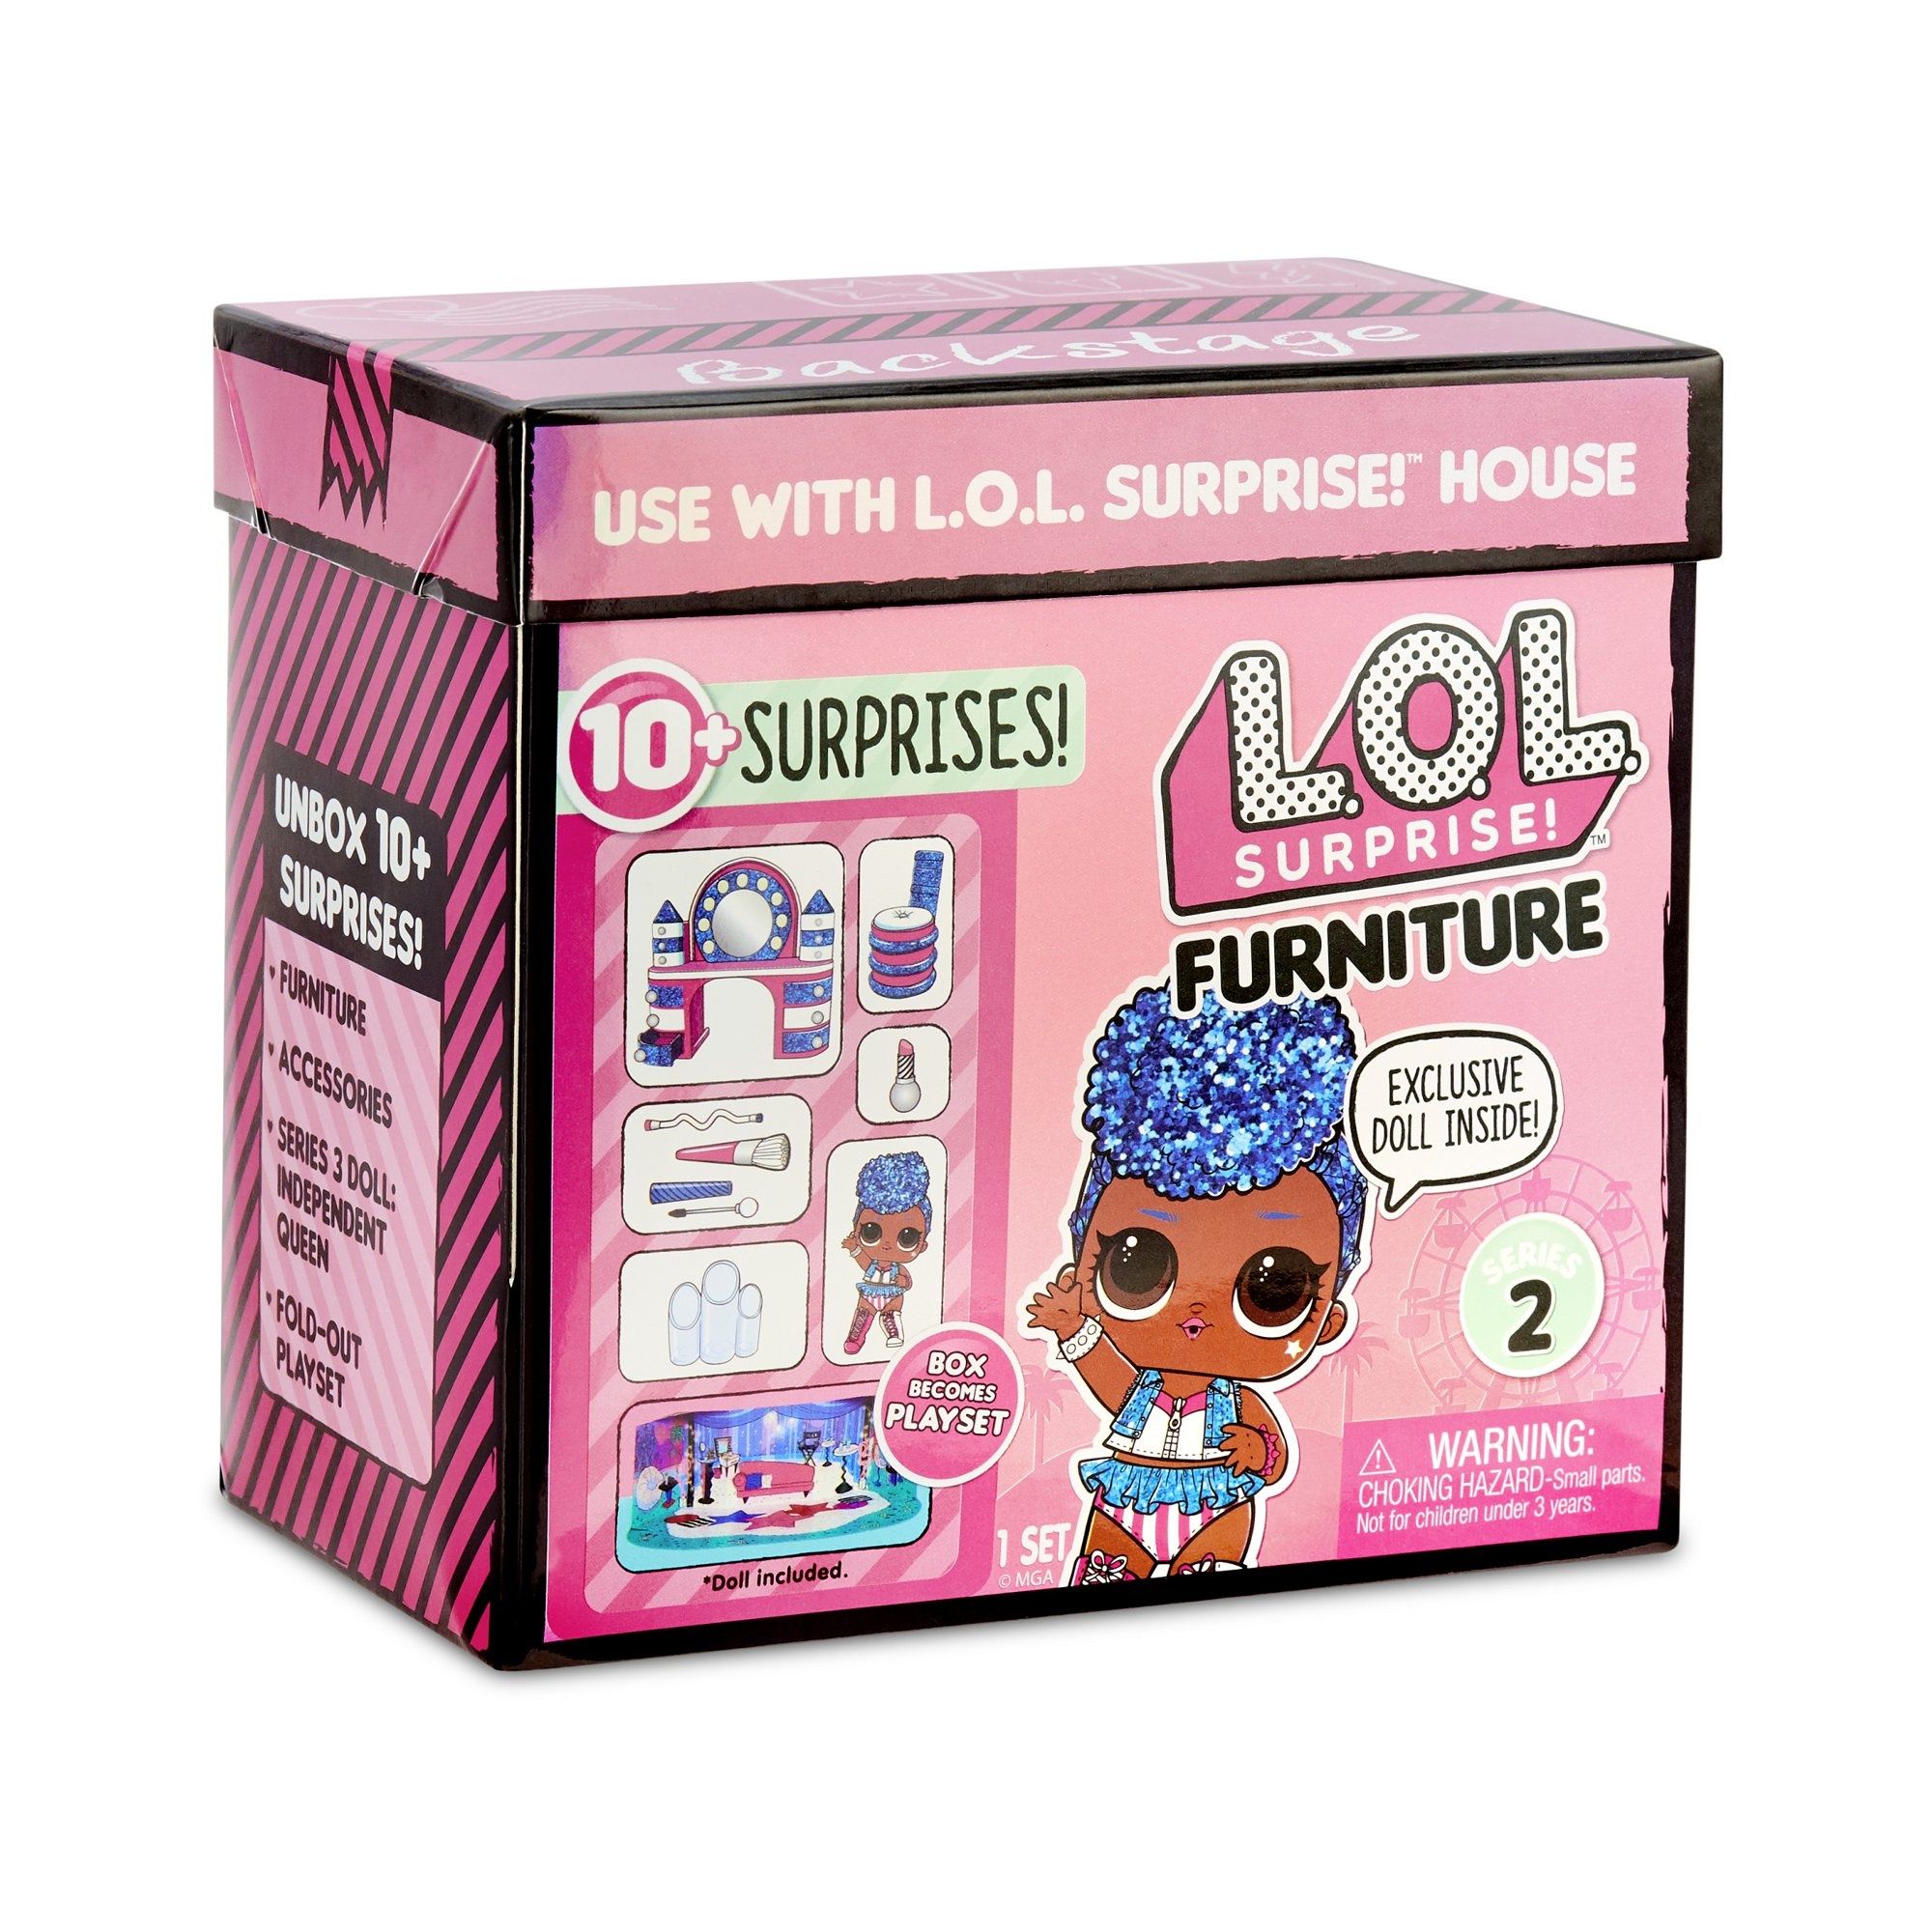 L.O.L. Surprise! Furniture Backstage with Independent Queen & 10+ Surp